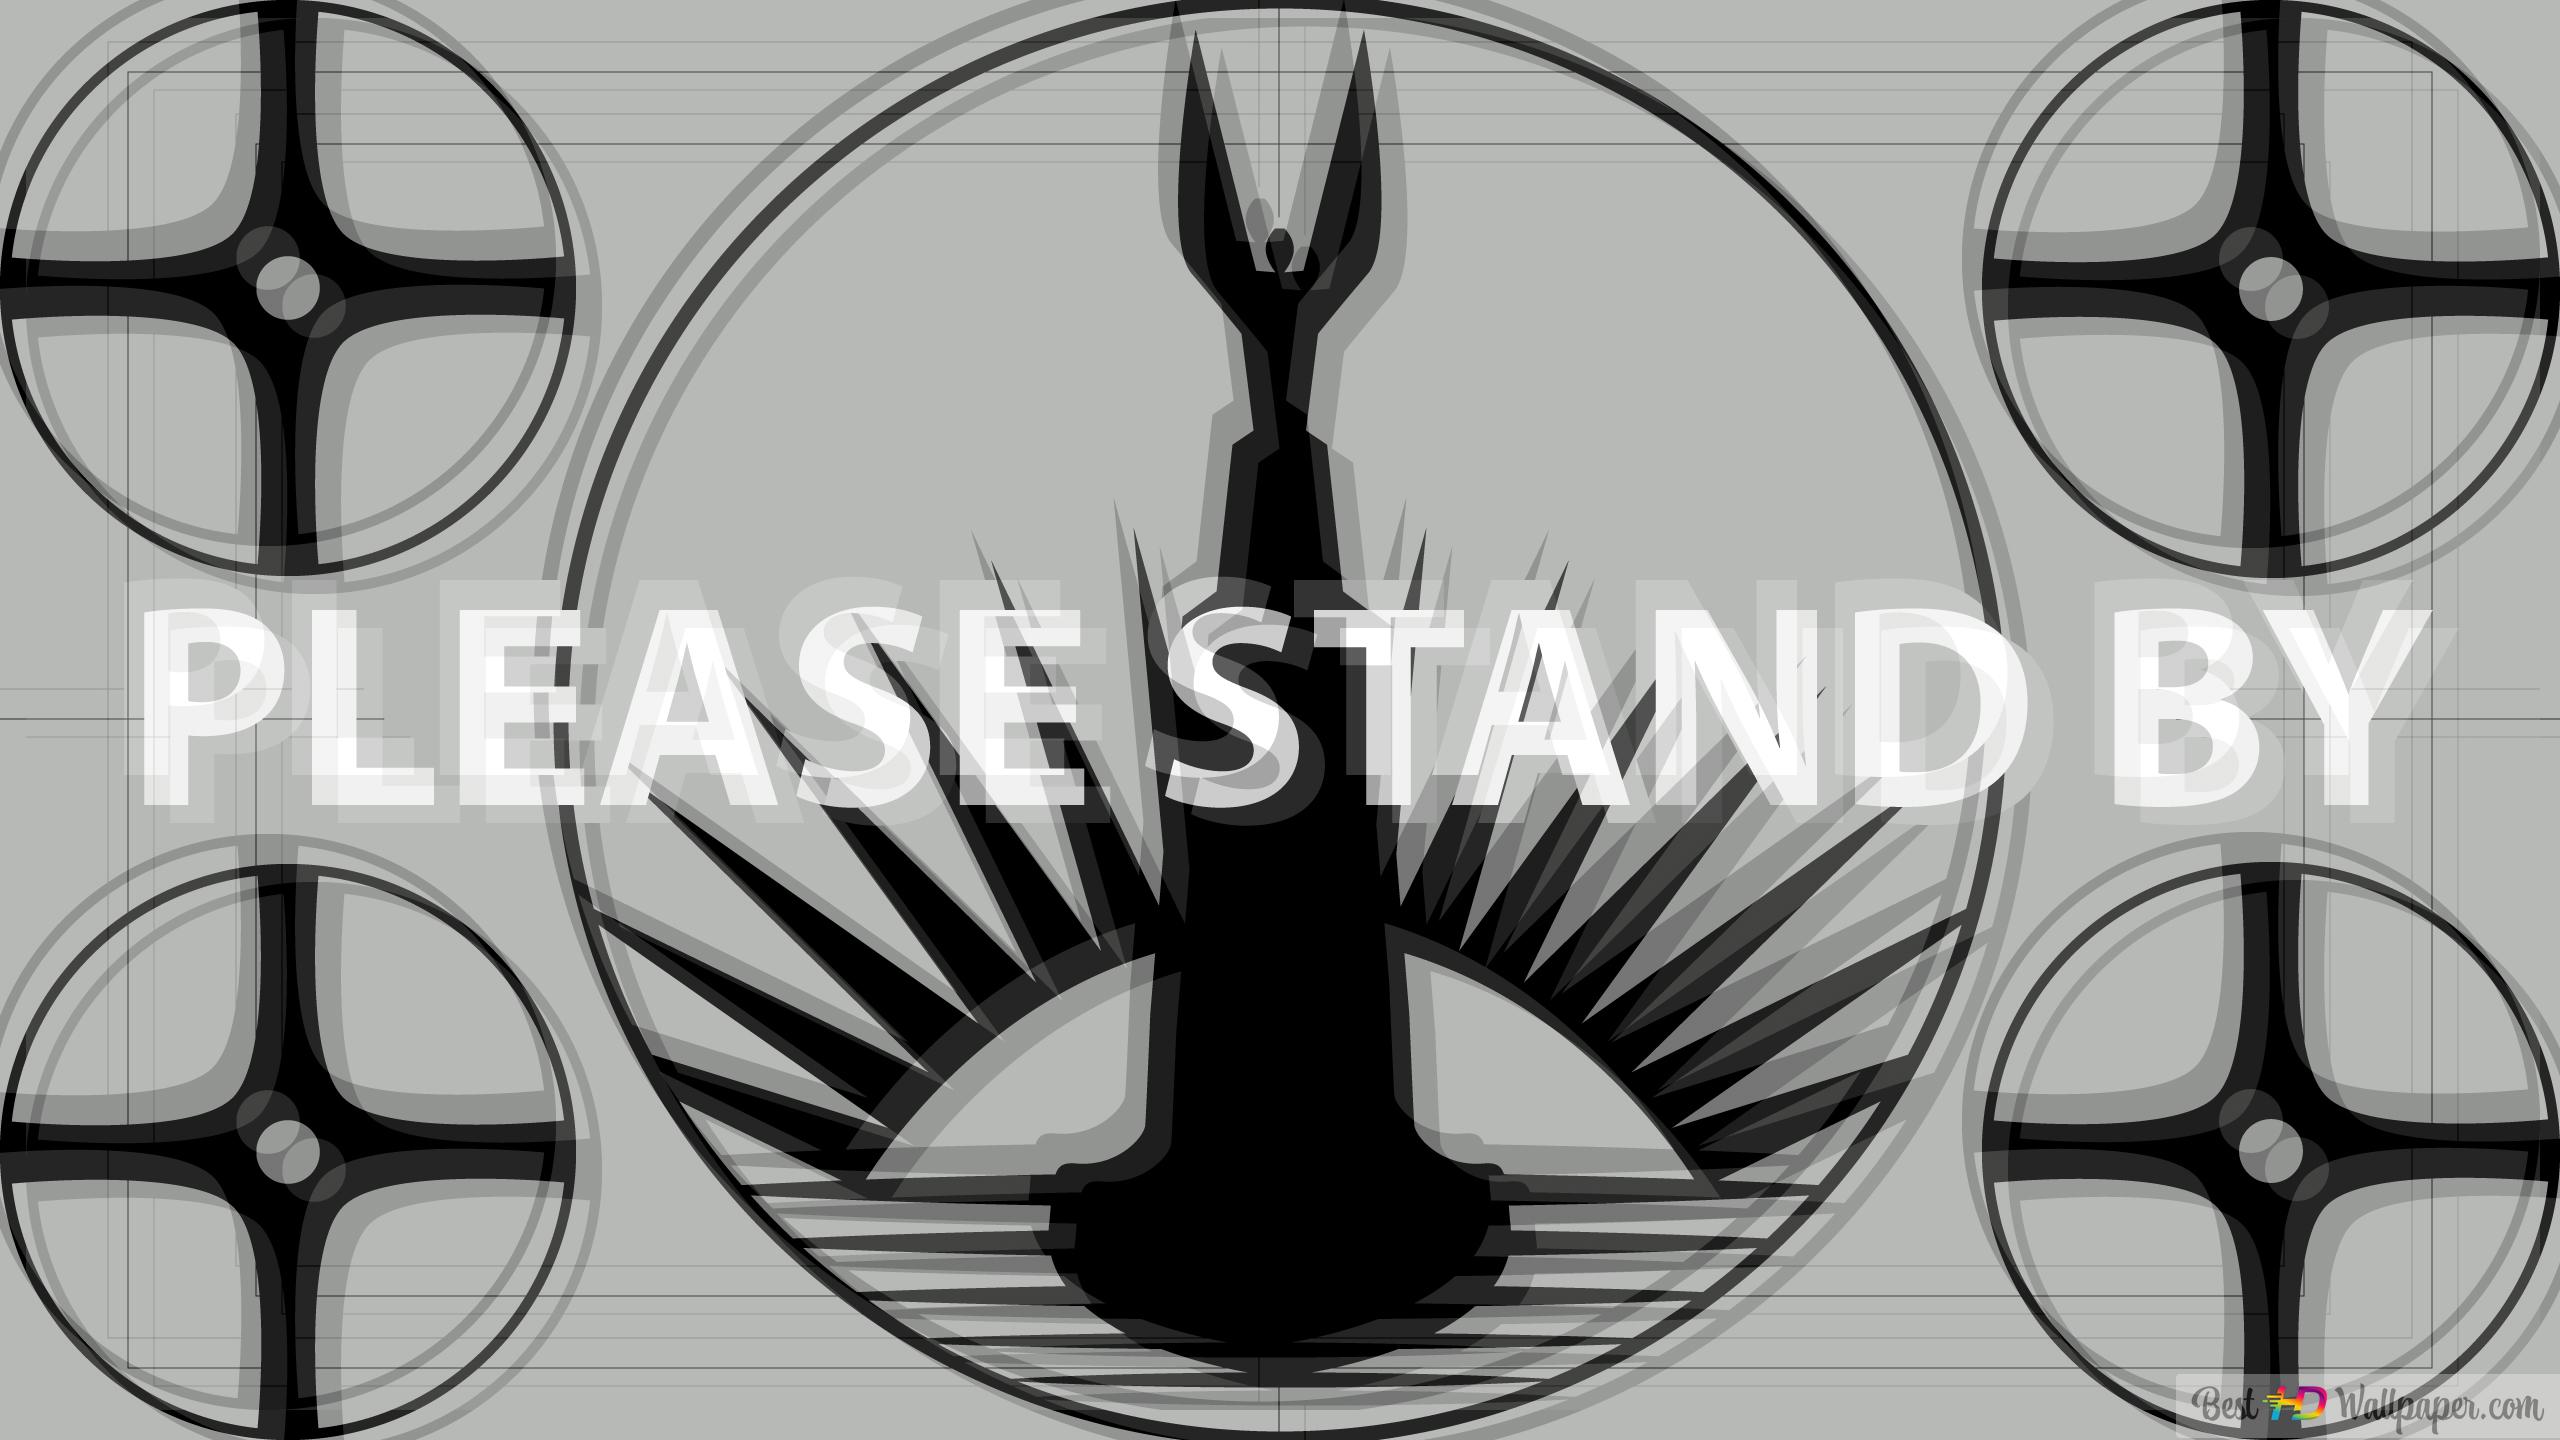 Please Stand By 1920X1080 Wallpapers